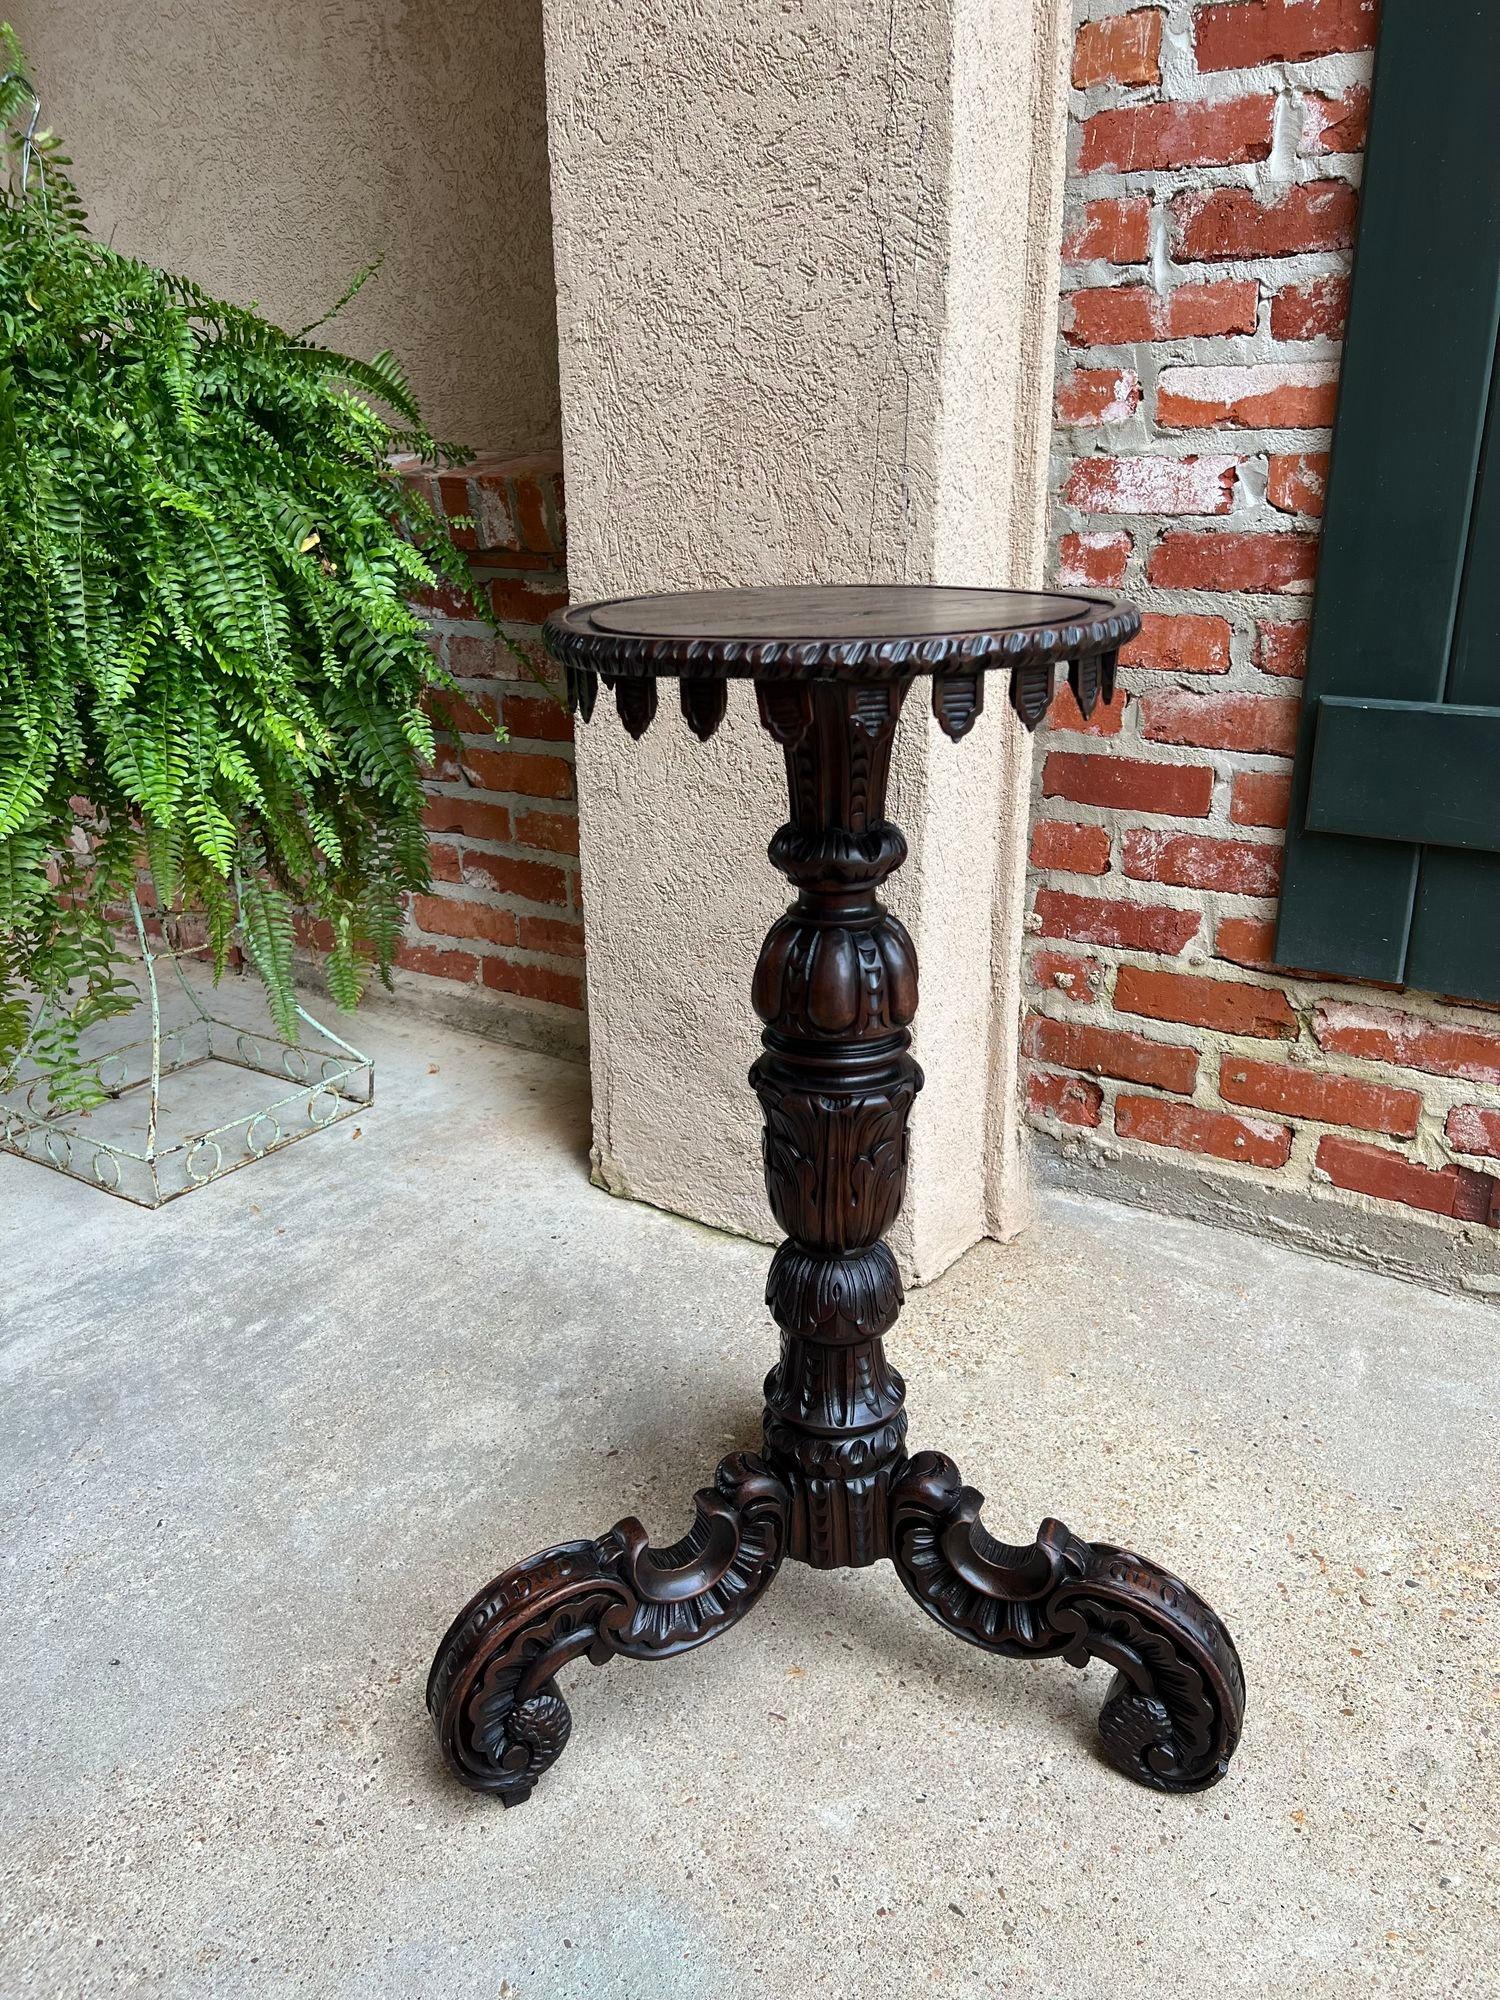 Antique English Carved Display Pedestal Stand Jardiniere Plant Bronze.

Direct from England, highly carved throughout, excellent for a plant stand or displaying your prized bronze statue, or majolica jardiniere, or whatever treasure you wish to